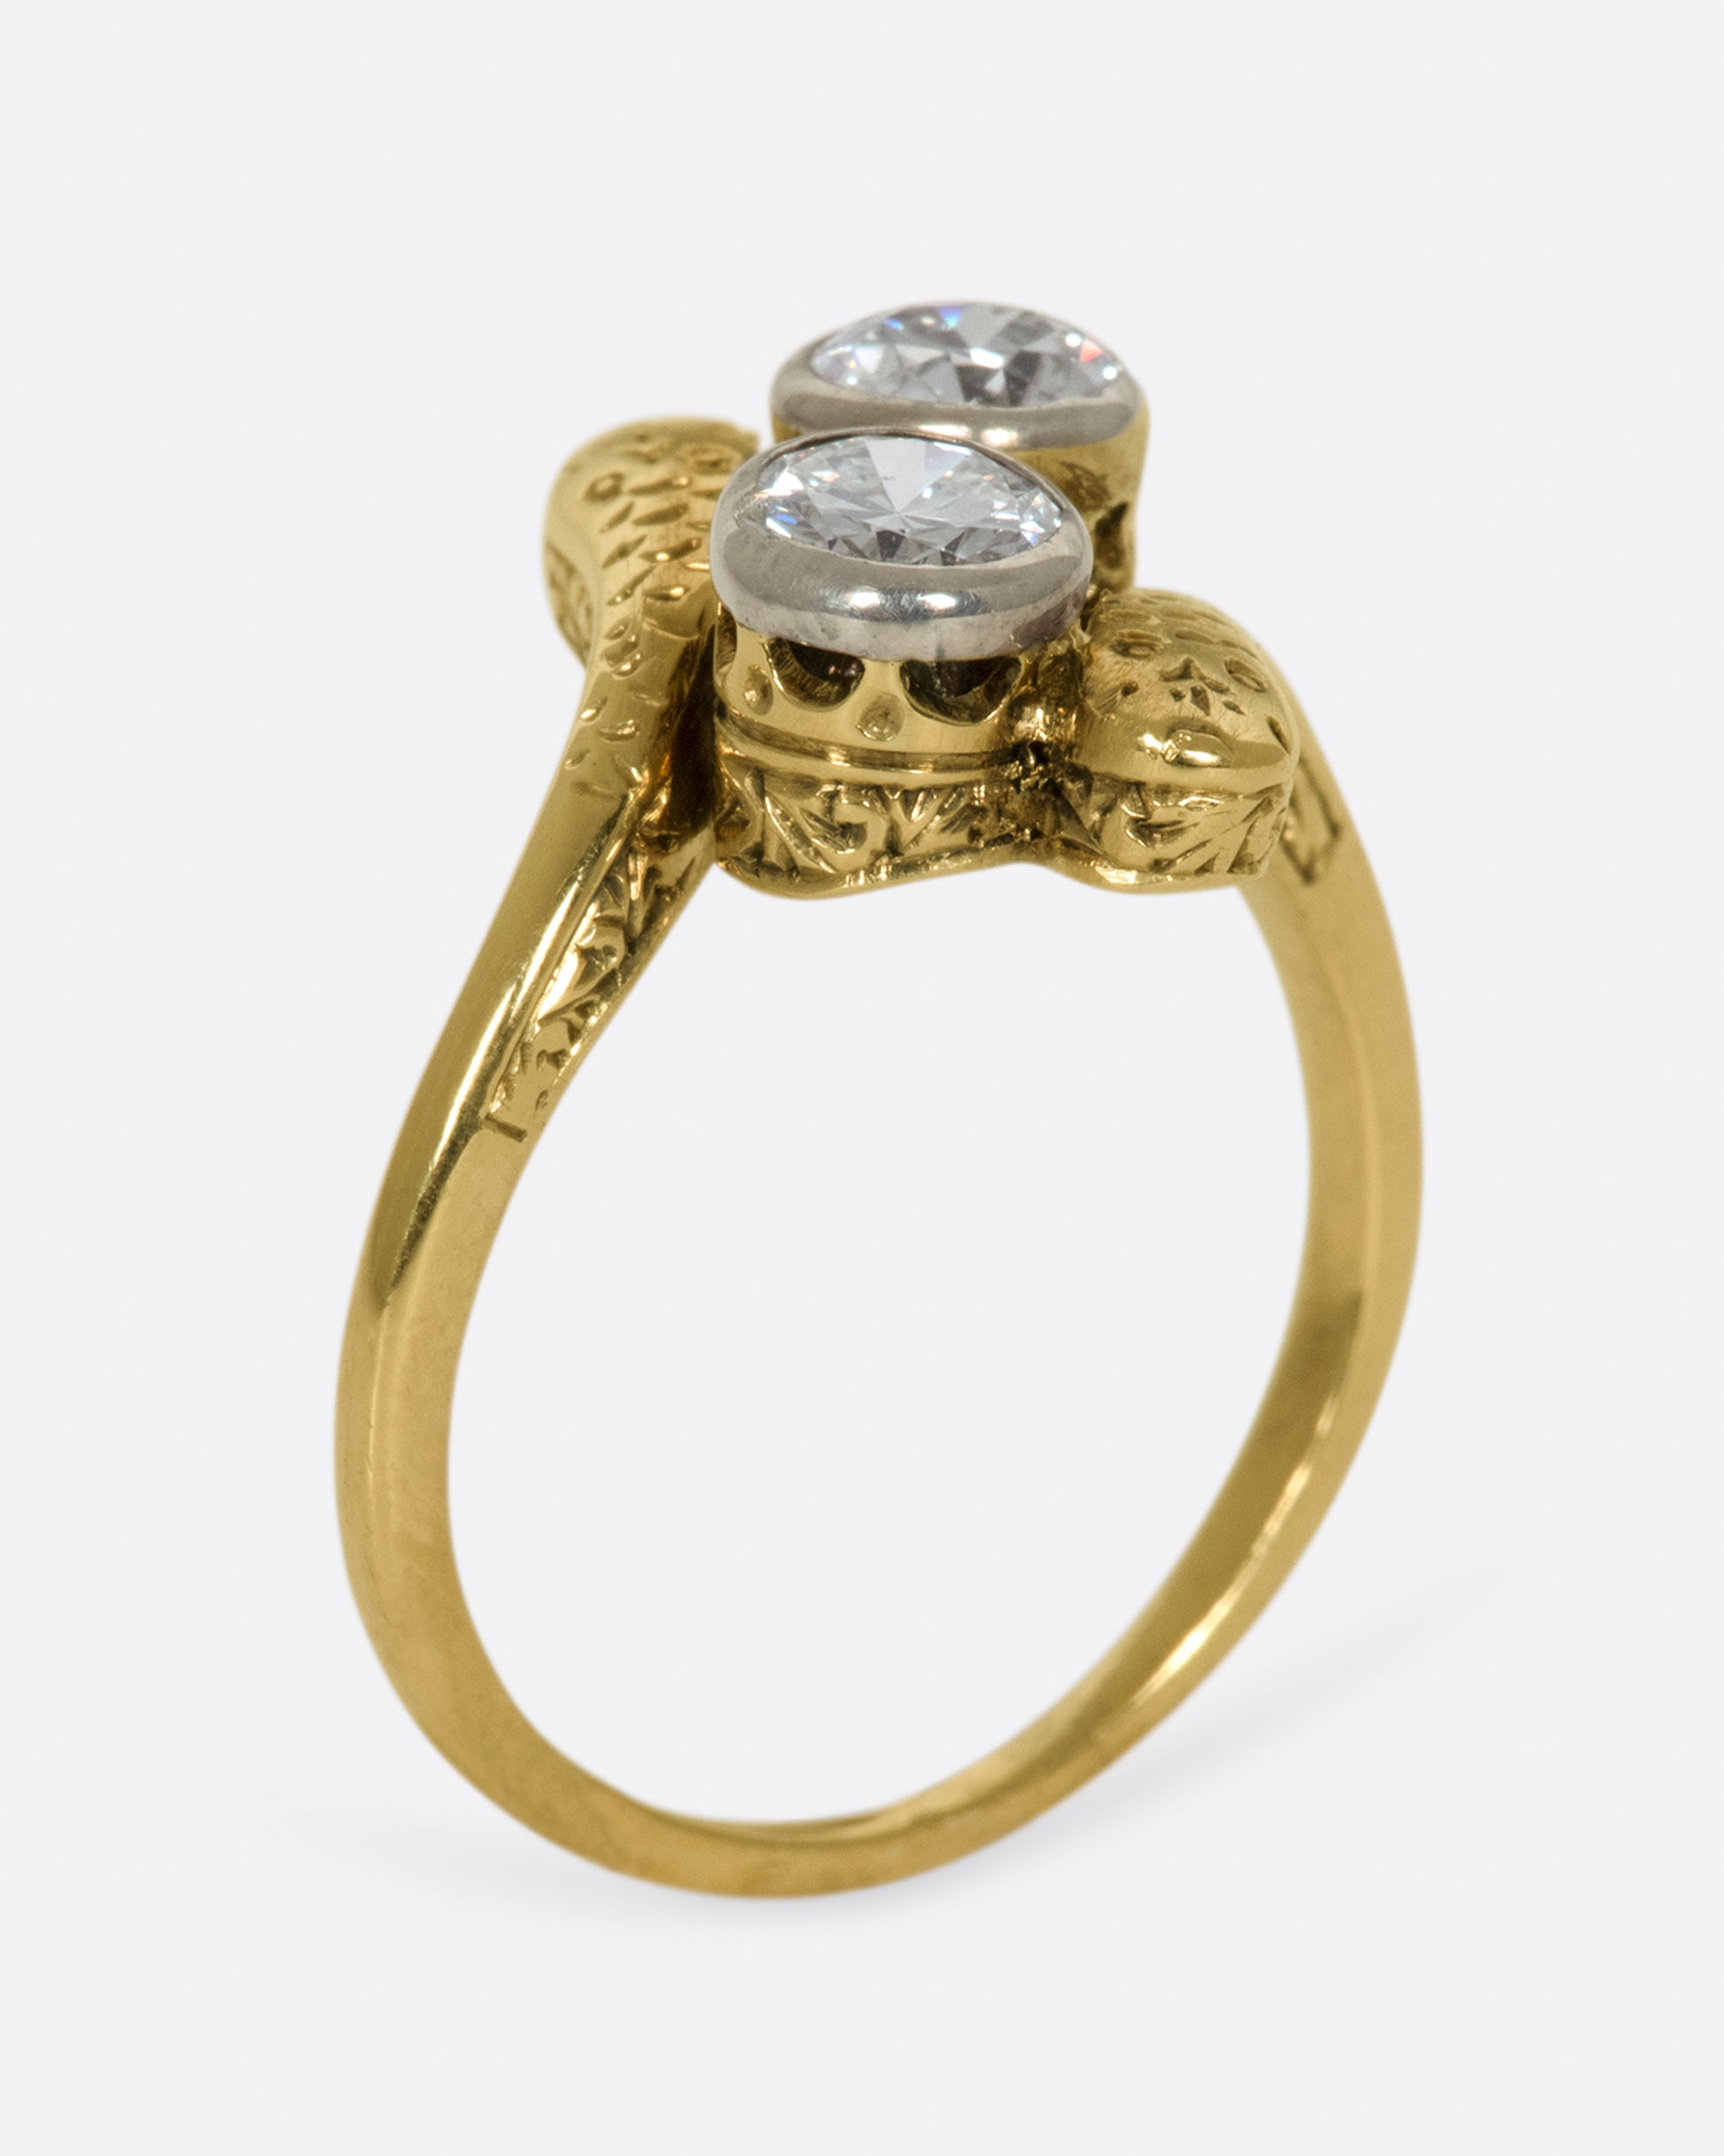 A vintage, Russian ring with two large old European cut diamonds at its center.